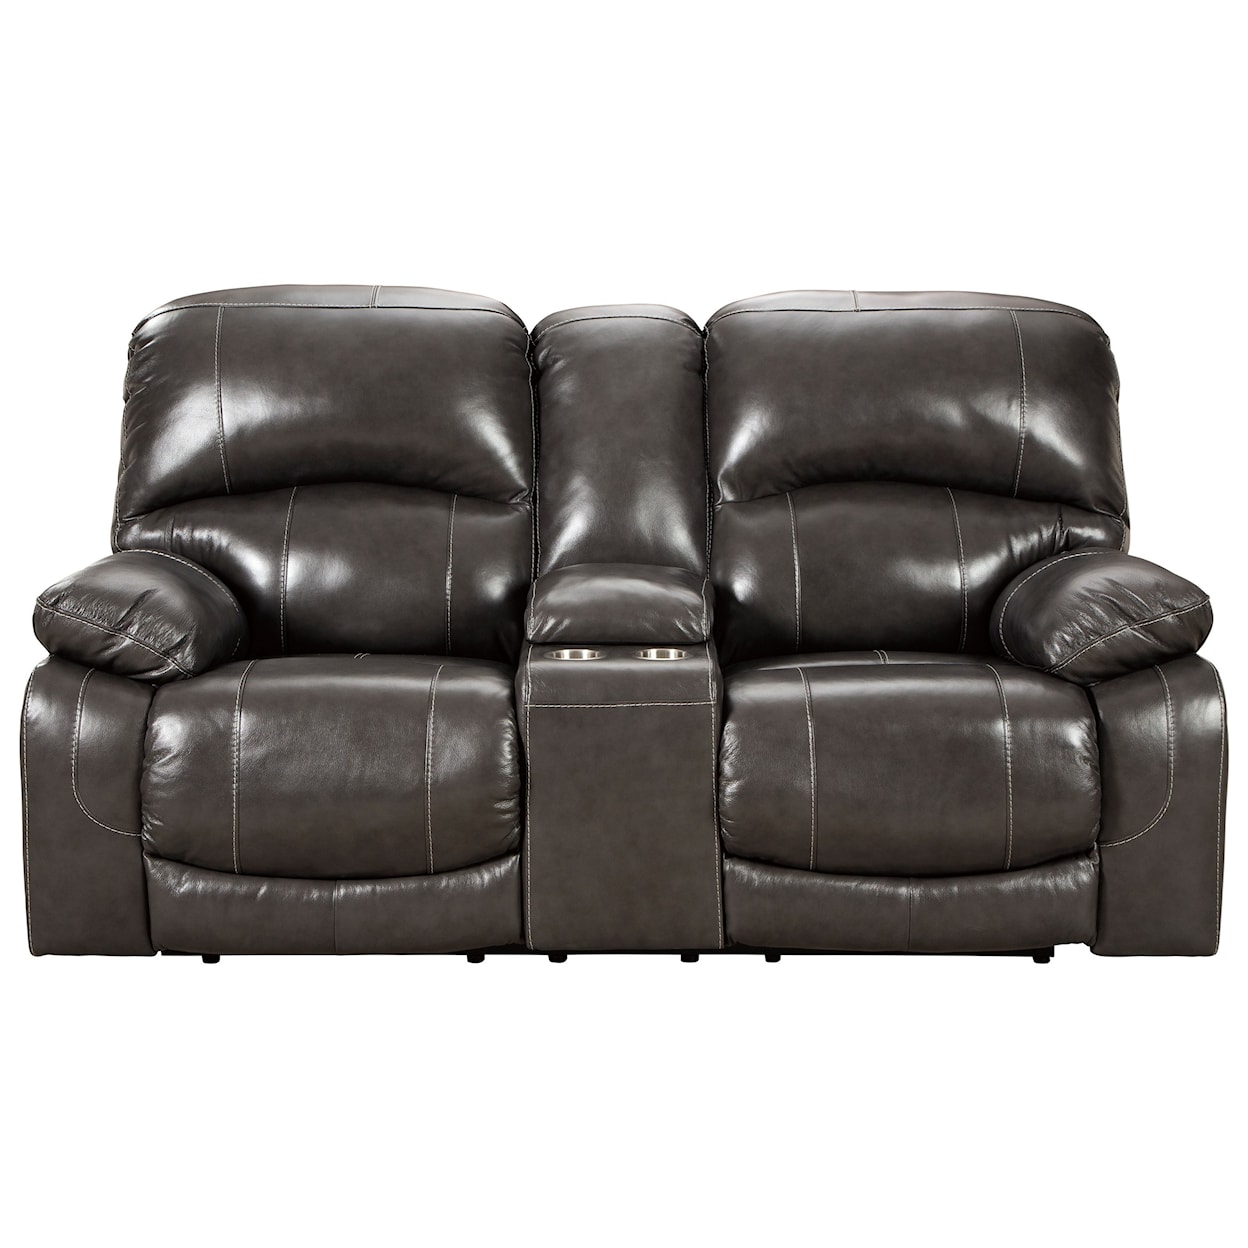 Signature Design by Ashley Furniture Hallstrung Pwr Rec Loveseat with Console & Adj Hdrsts